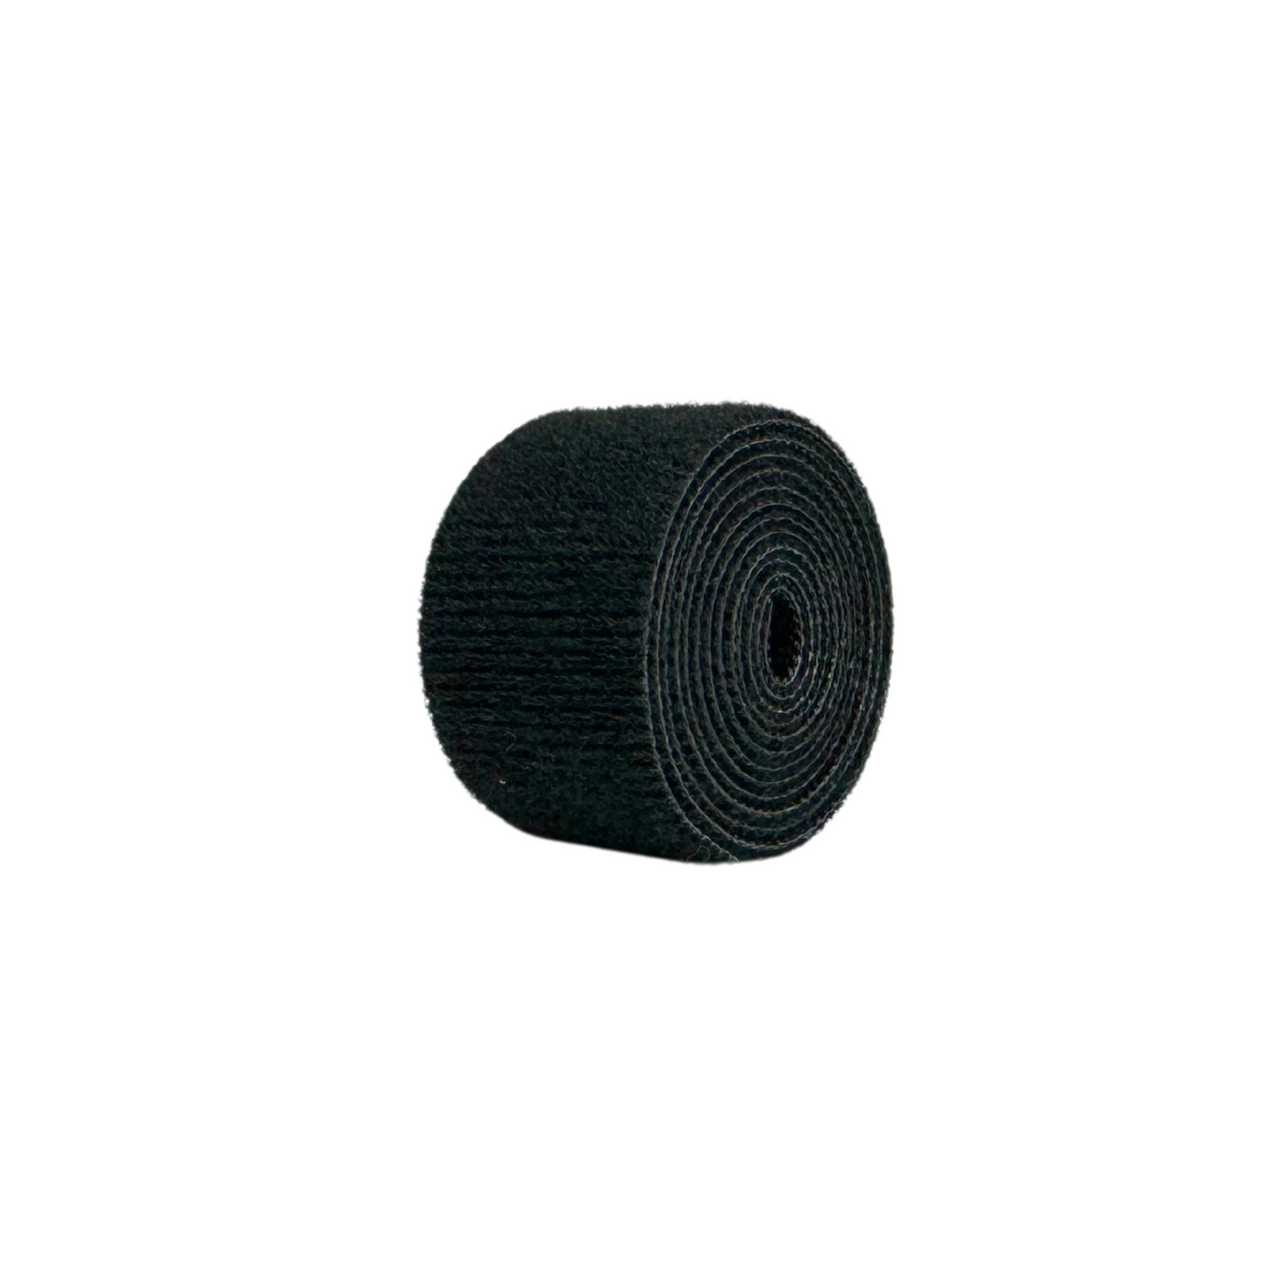 51110 VELCRO ONE WRAP - 3 FT ROLL